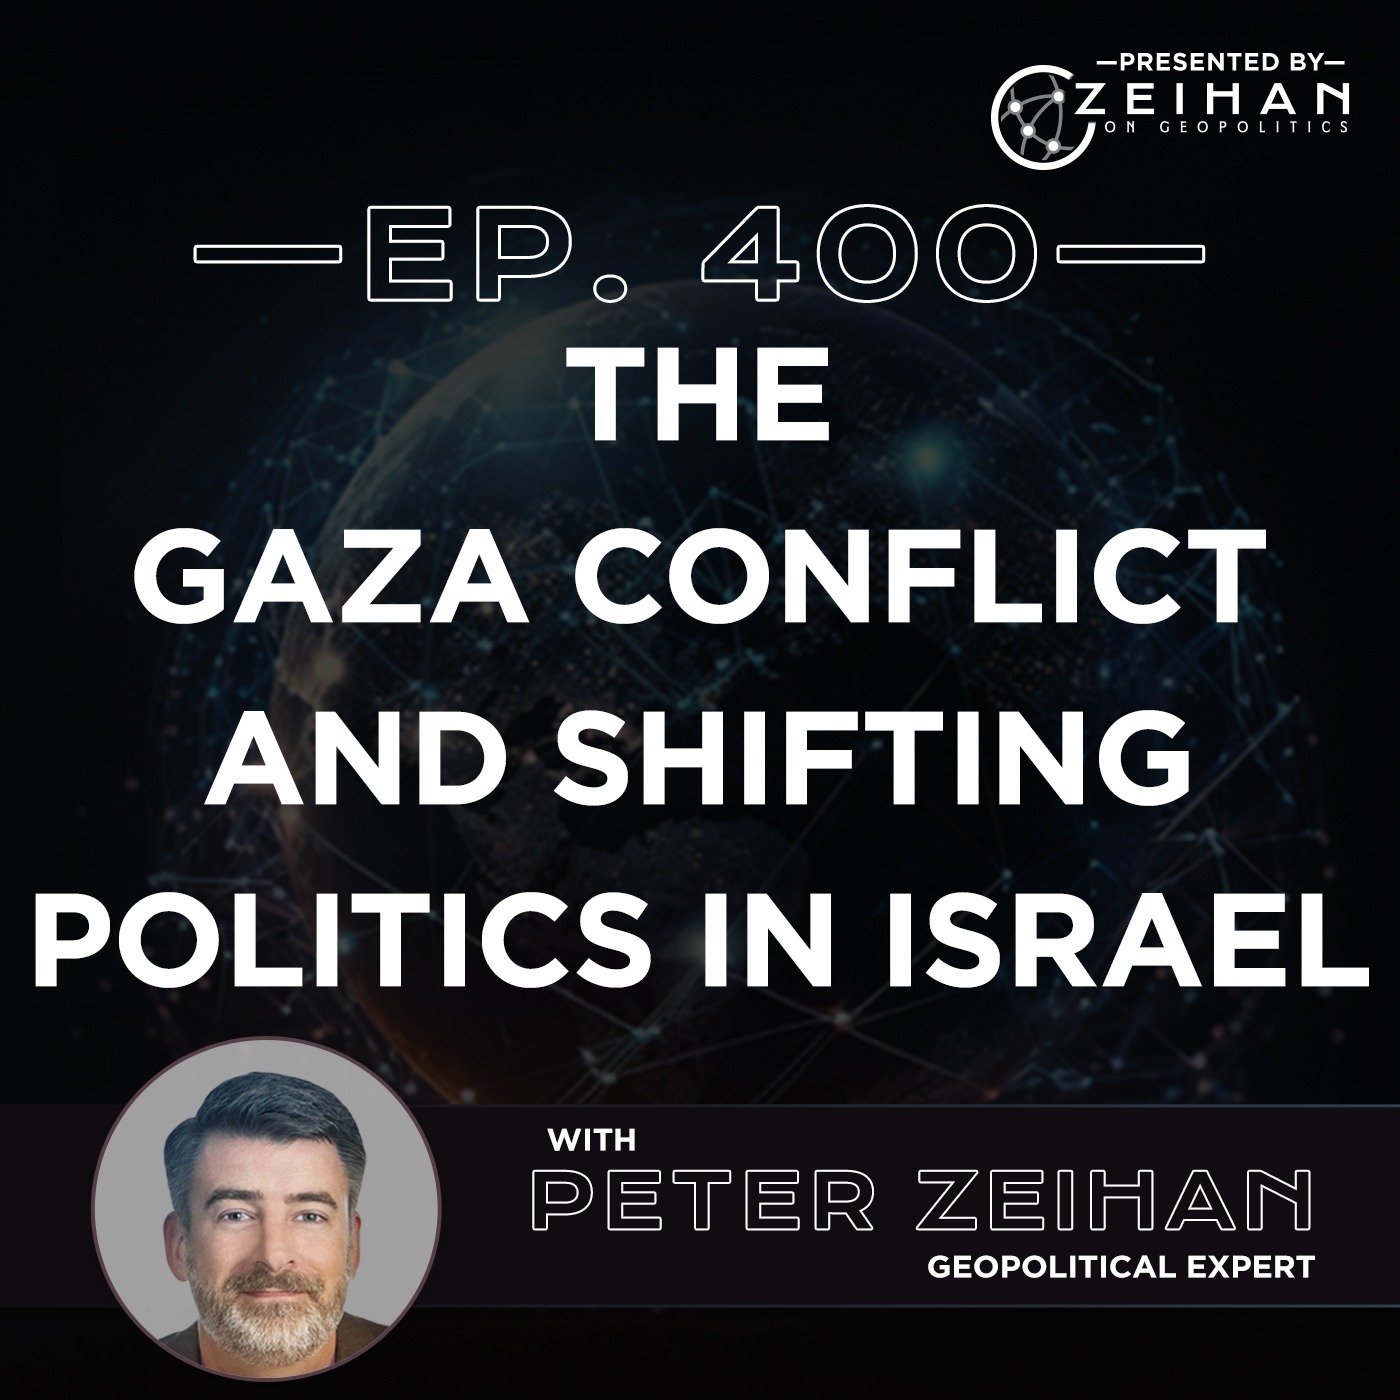 The Gaza Conflict and Shifting Politics in Israel || Peter Zeihan